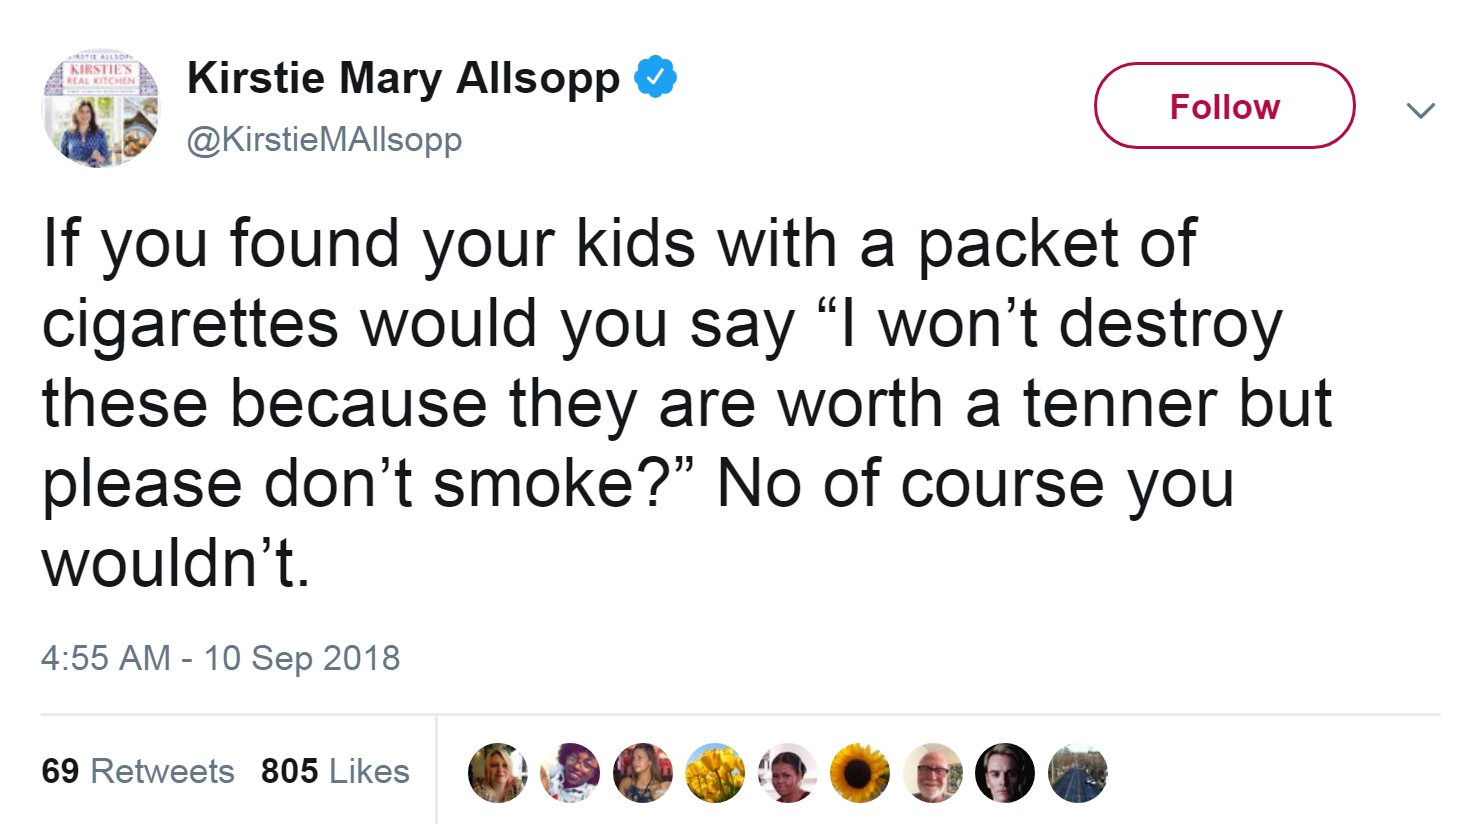 If you found your kids with a packet of cigarettes would you say "I won't destroy these because they are worth a tenner but please don't smoke?" No of course you wouldn't.